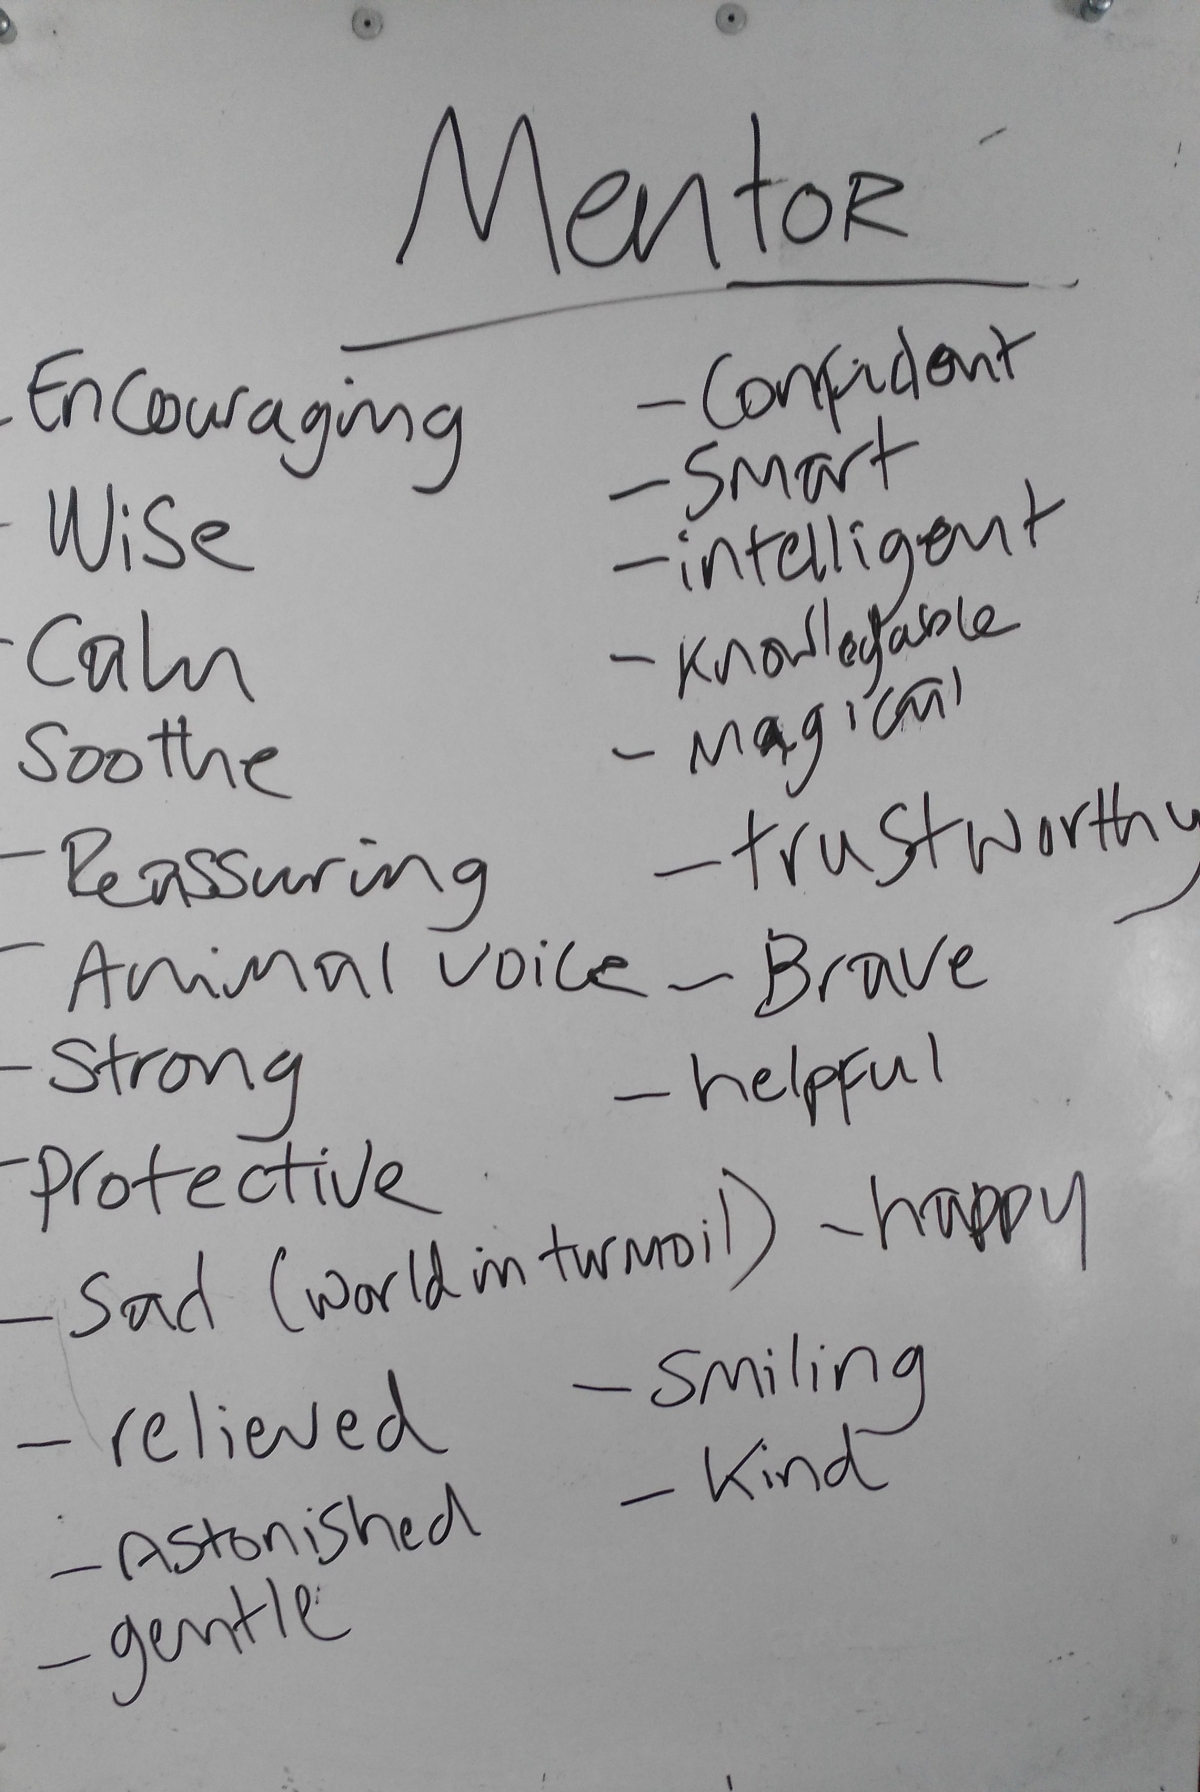 Words we can use to describe our mentor